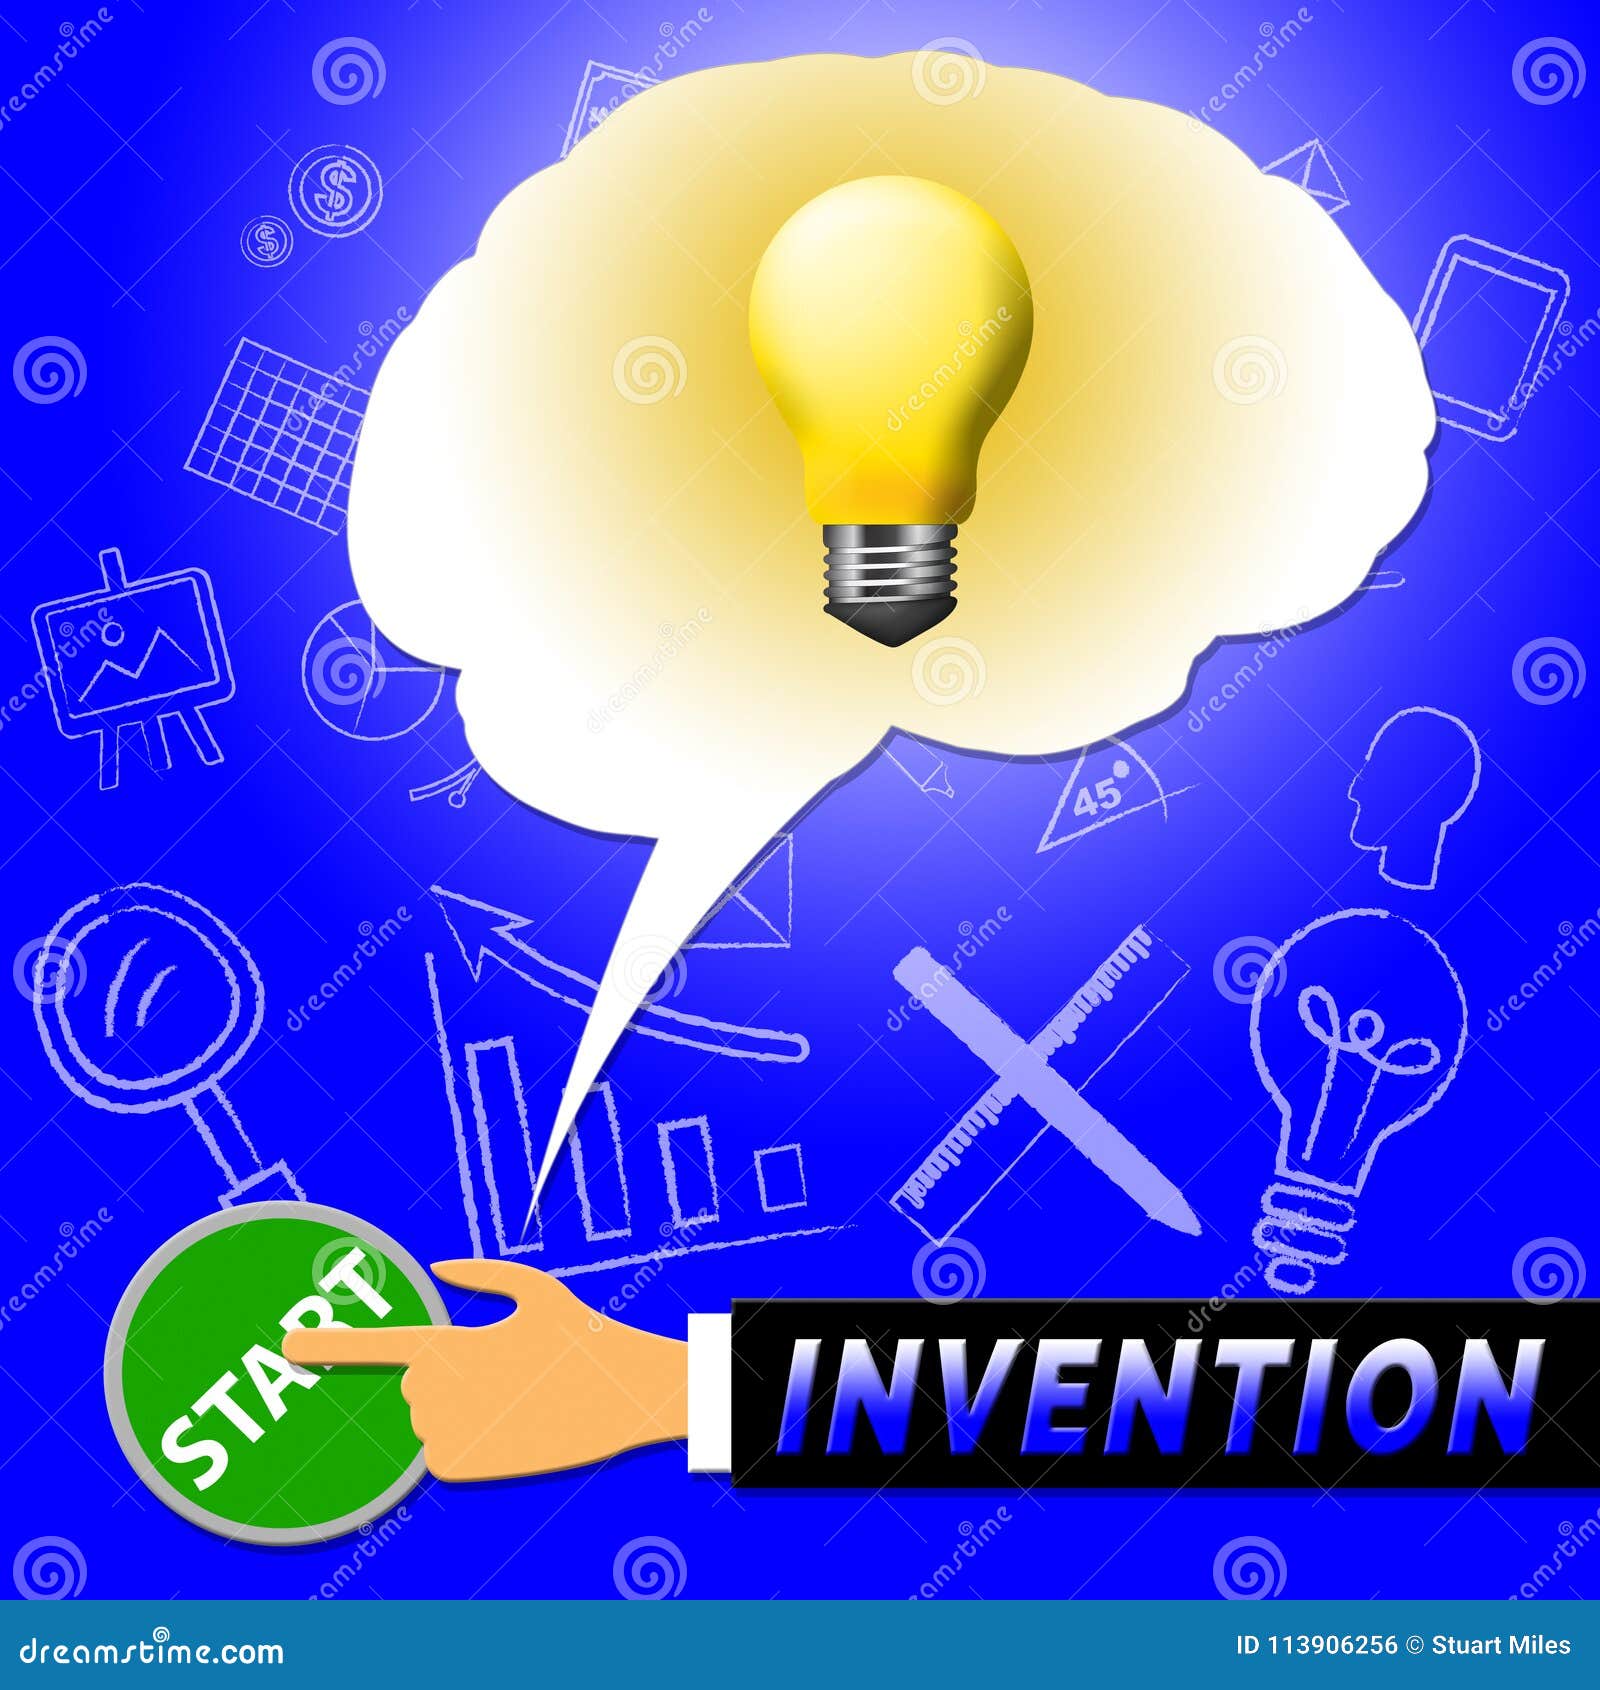 invention light means invents and innovating 3d 